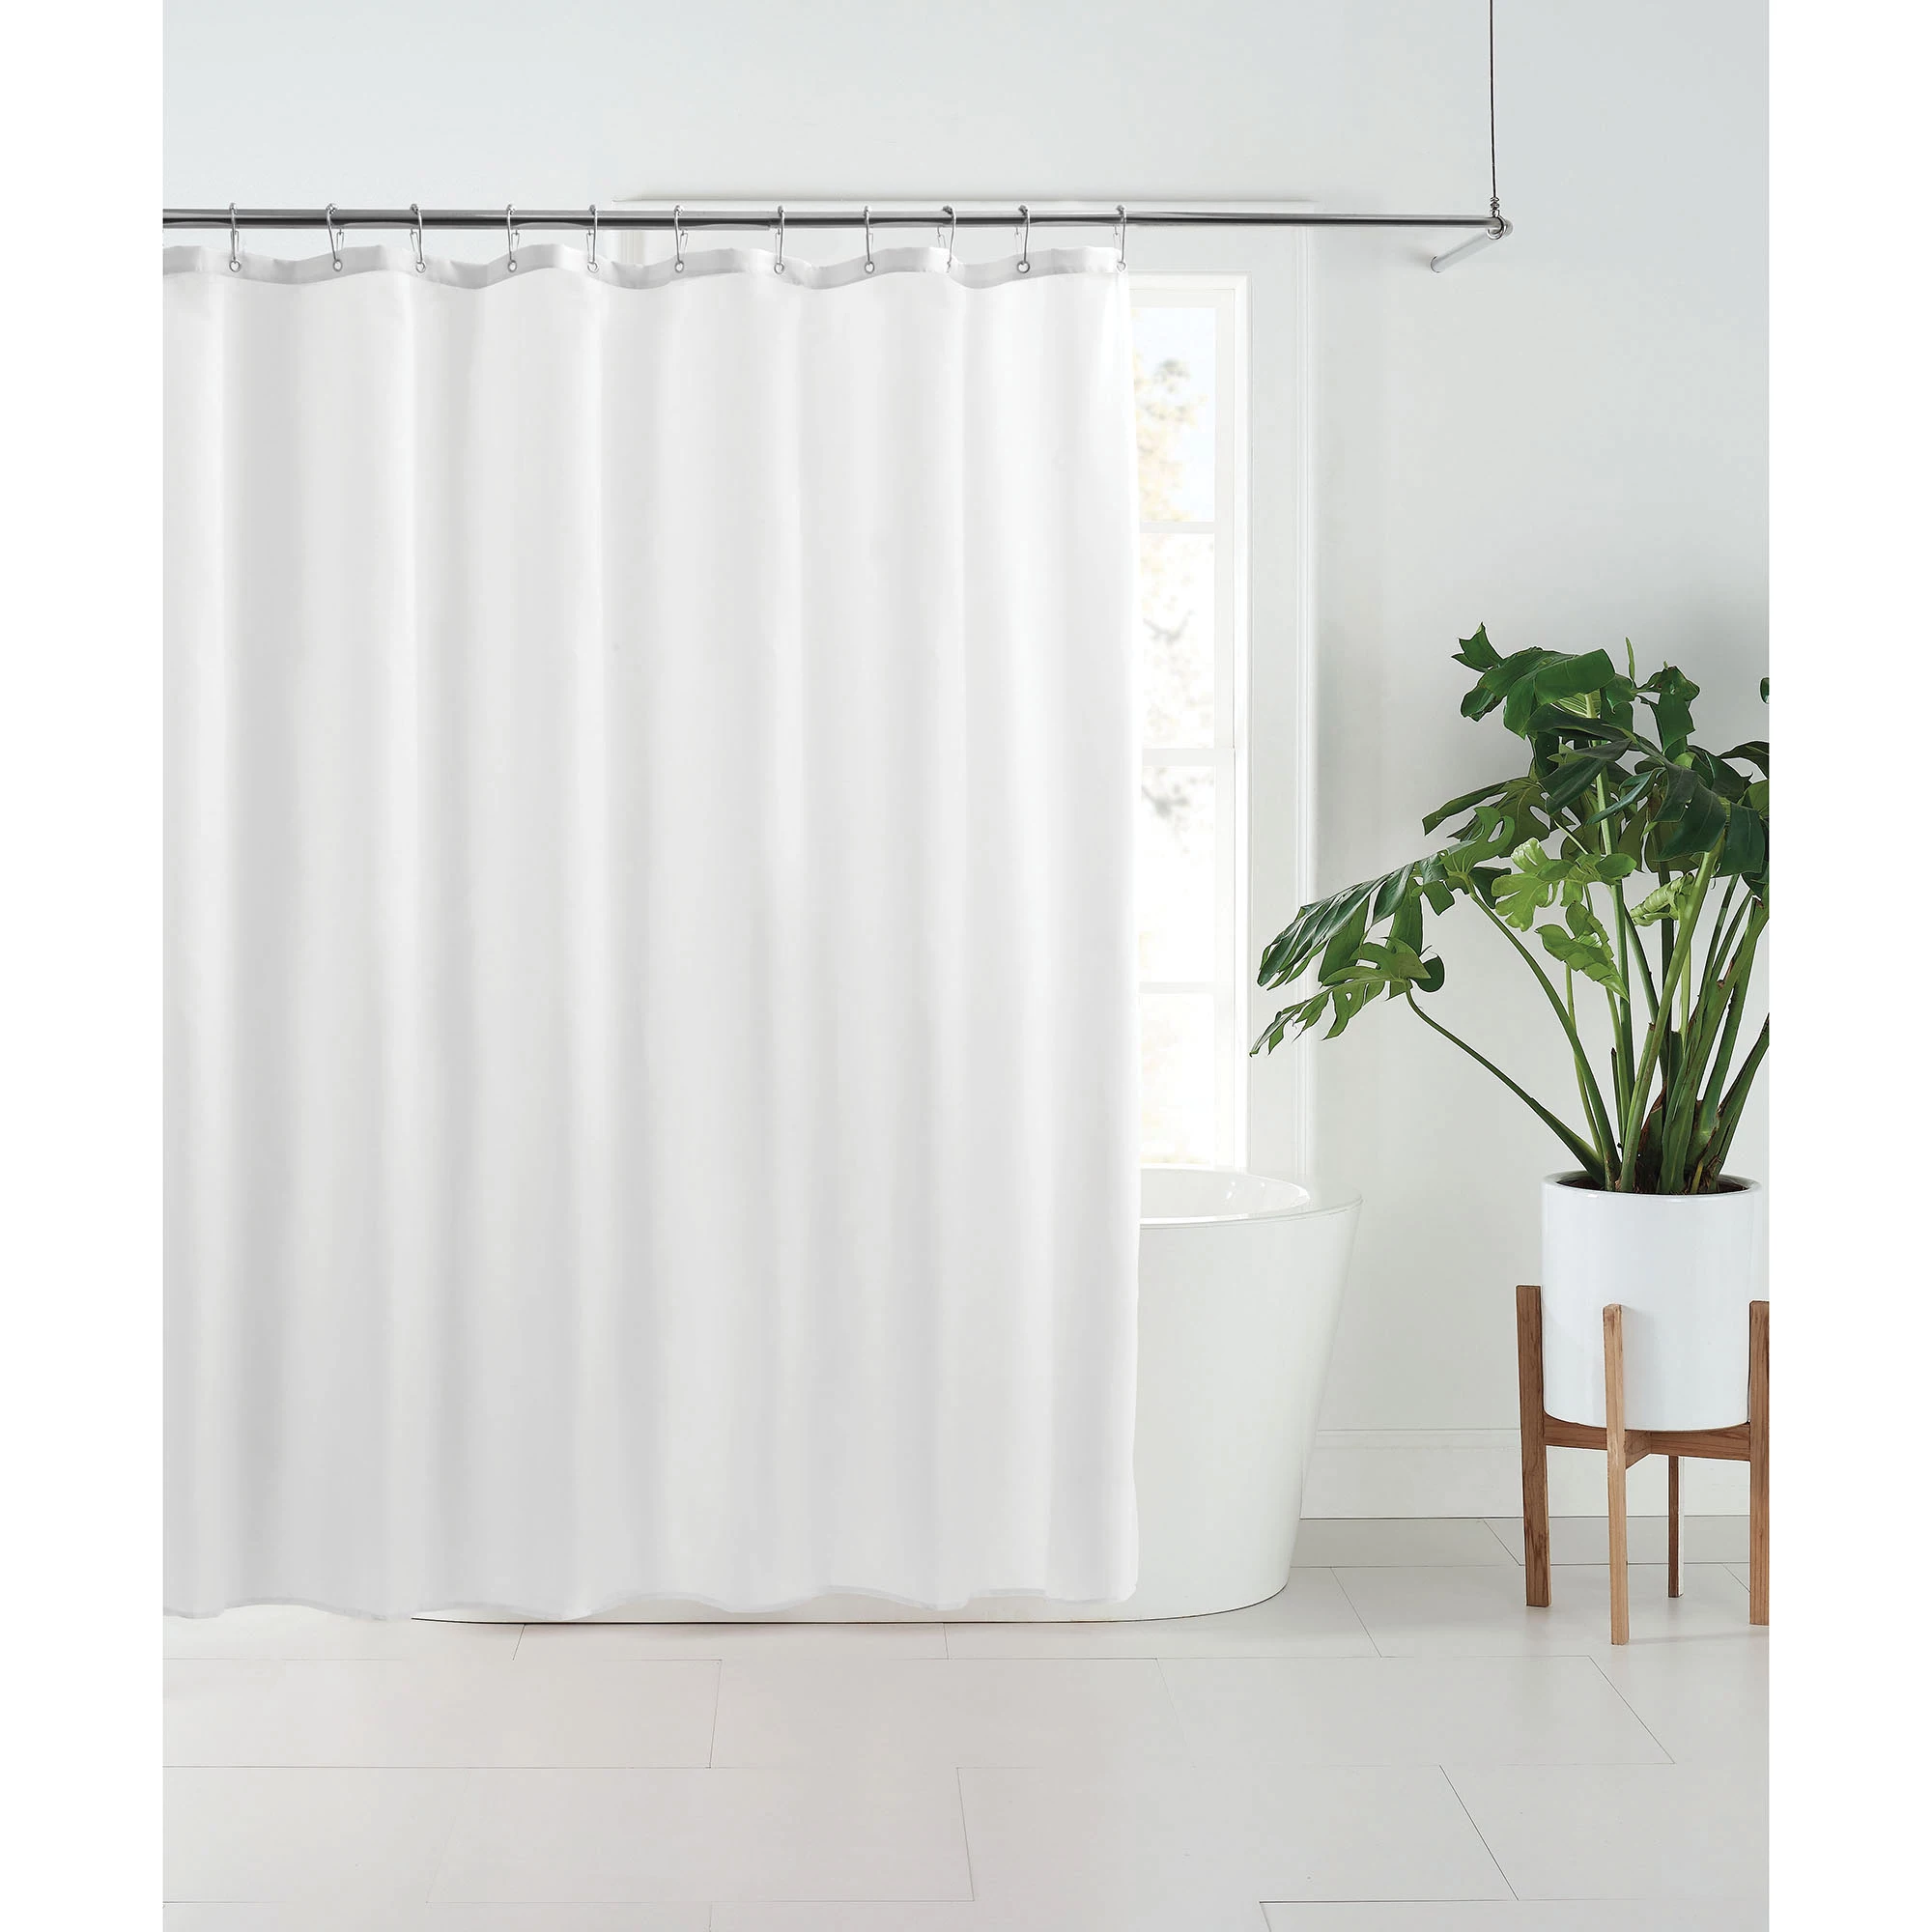 Nestwell™ 178x203 cm Fabric Shower Curtain Liner in White